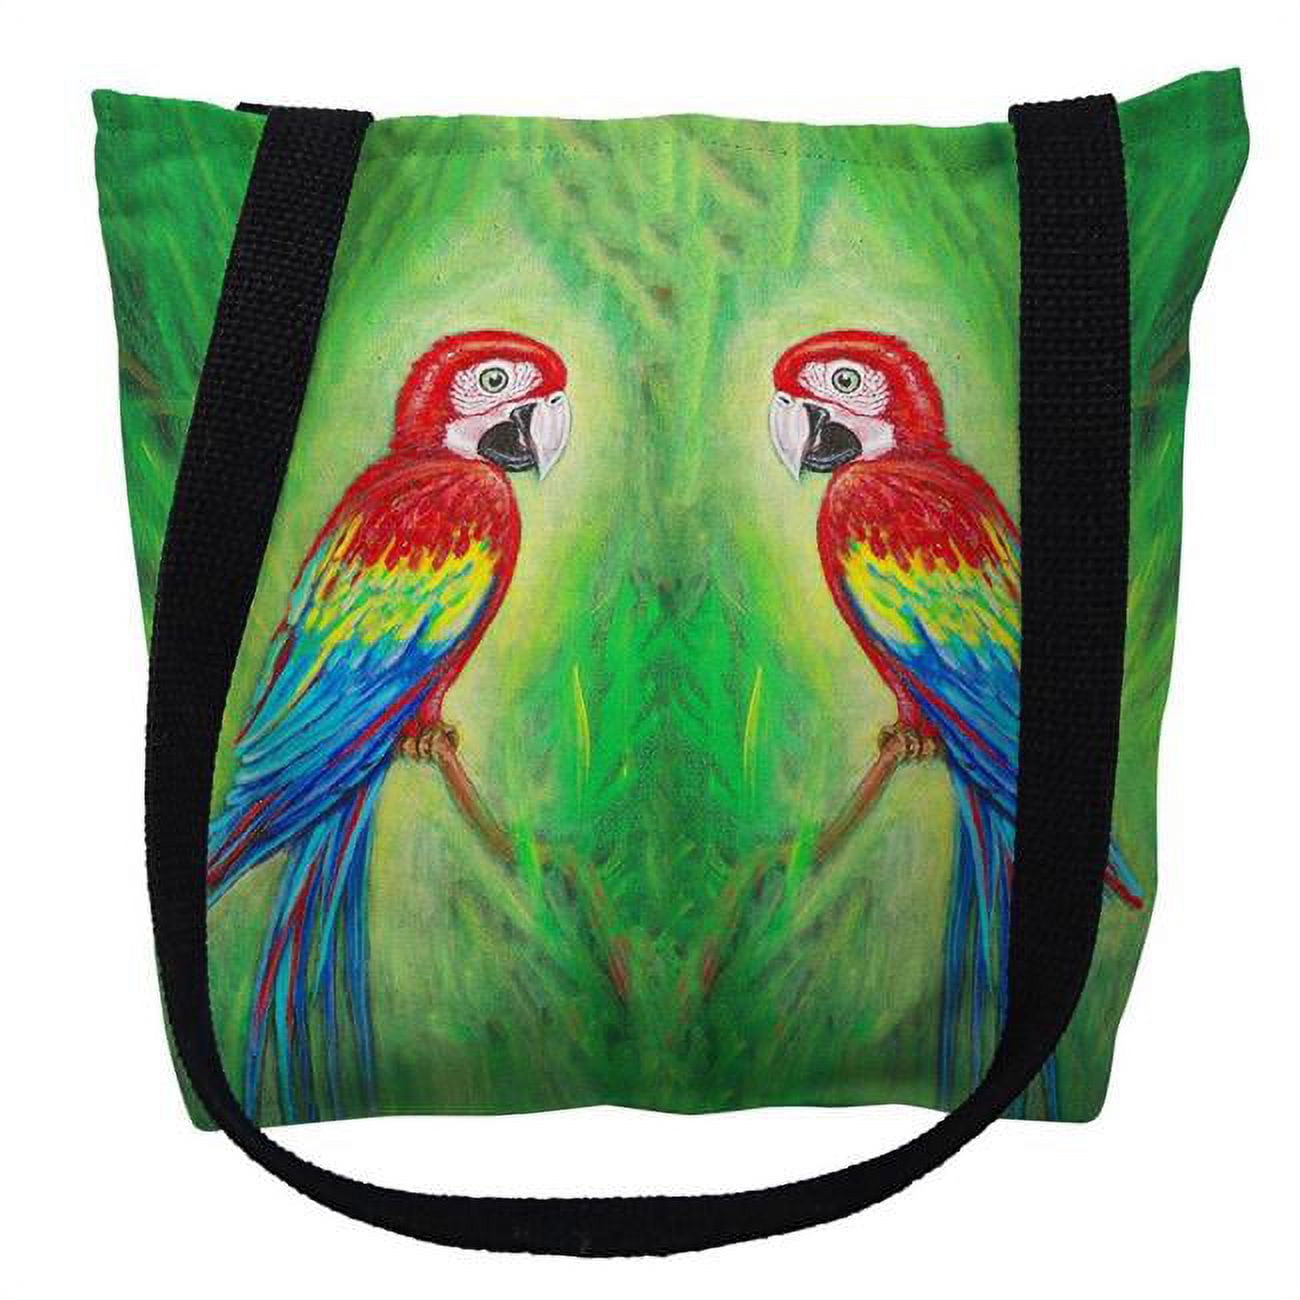 Ty033m 16 X 16 In. Red Macaws Tote Bag - Medium